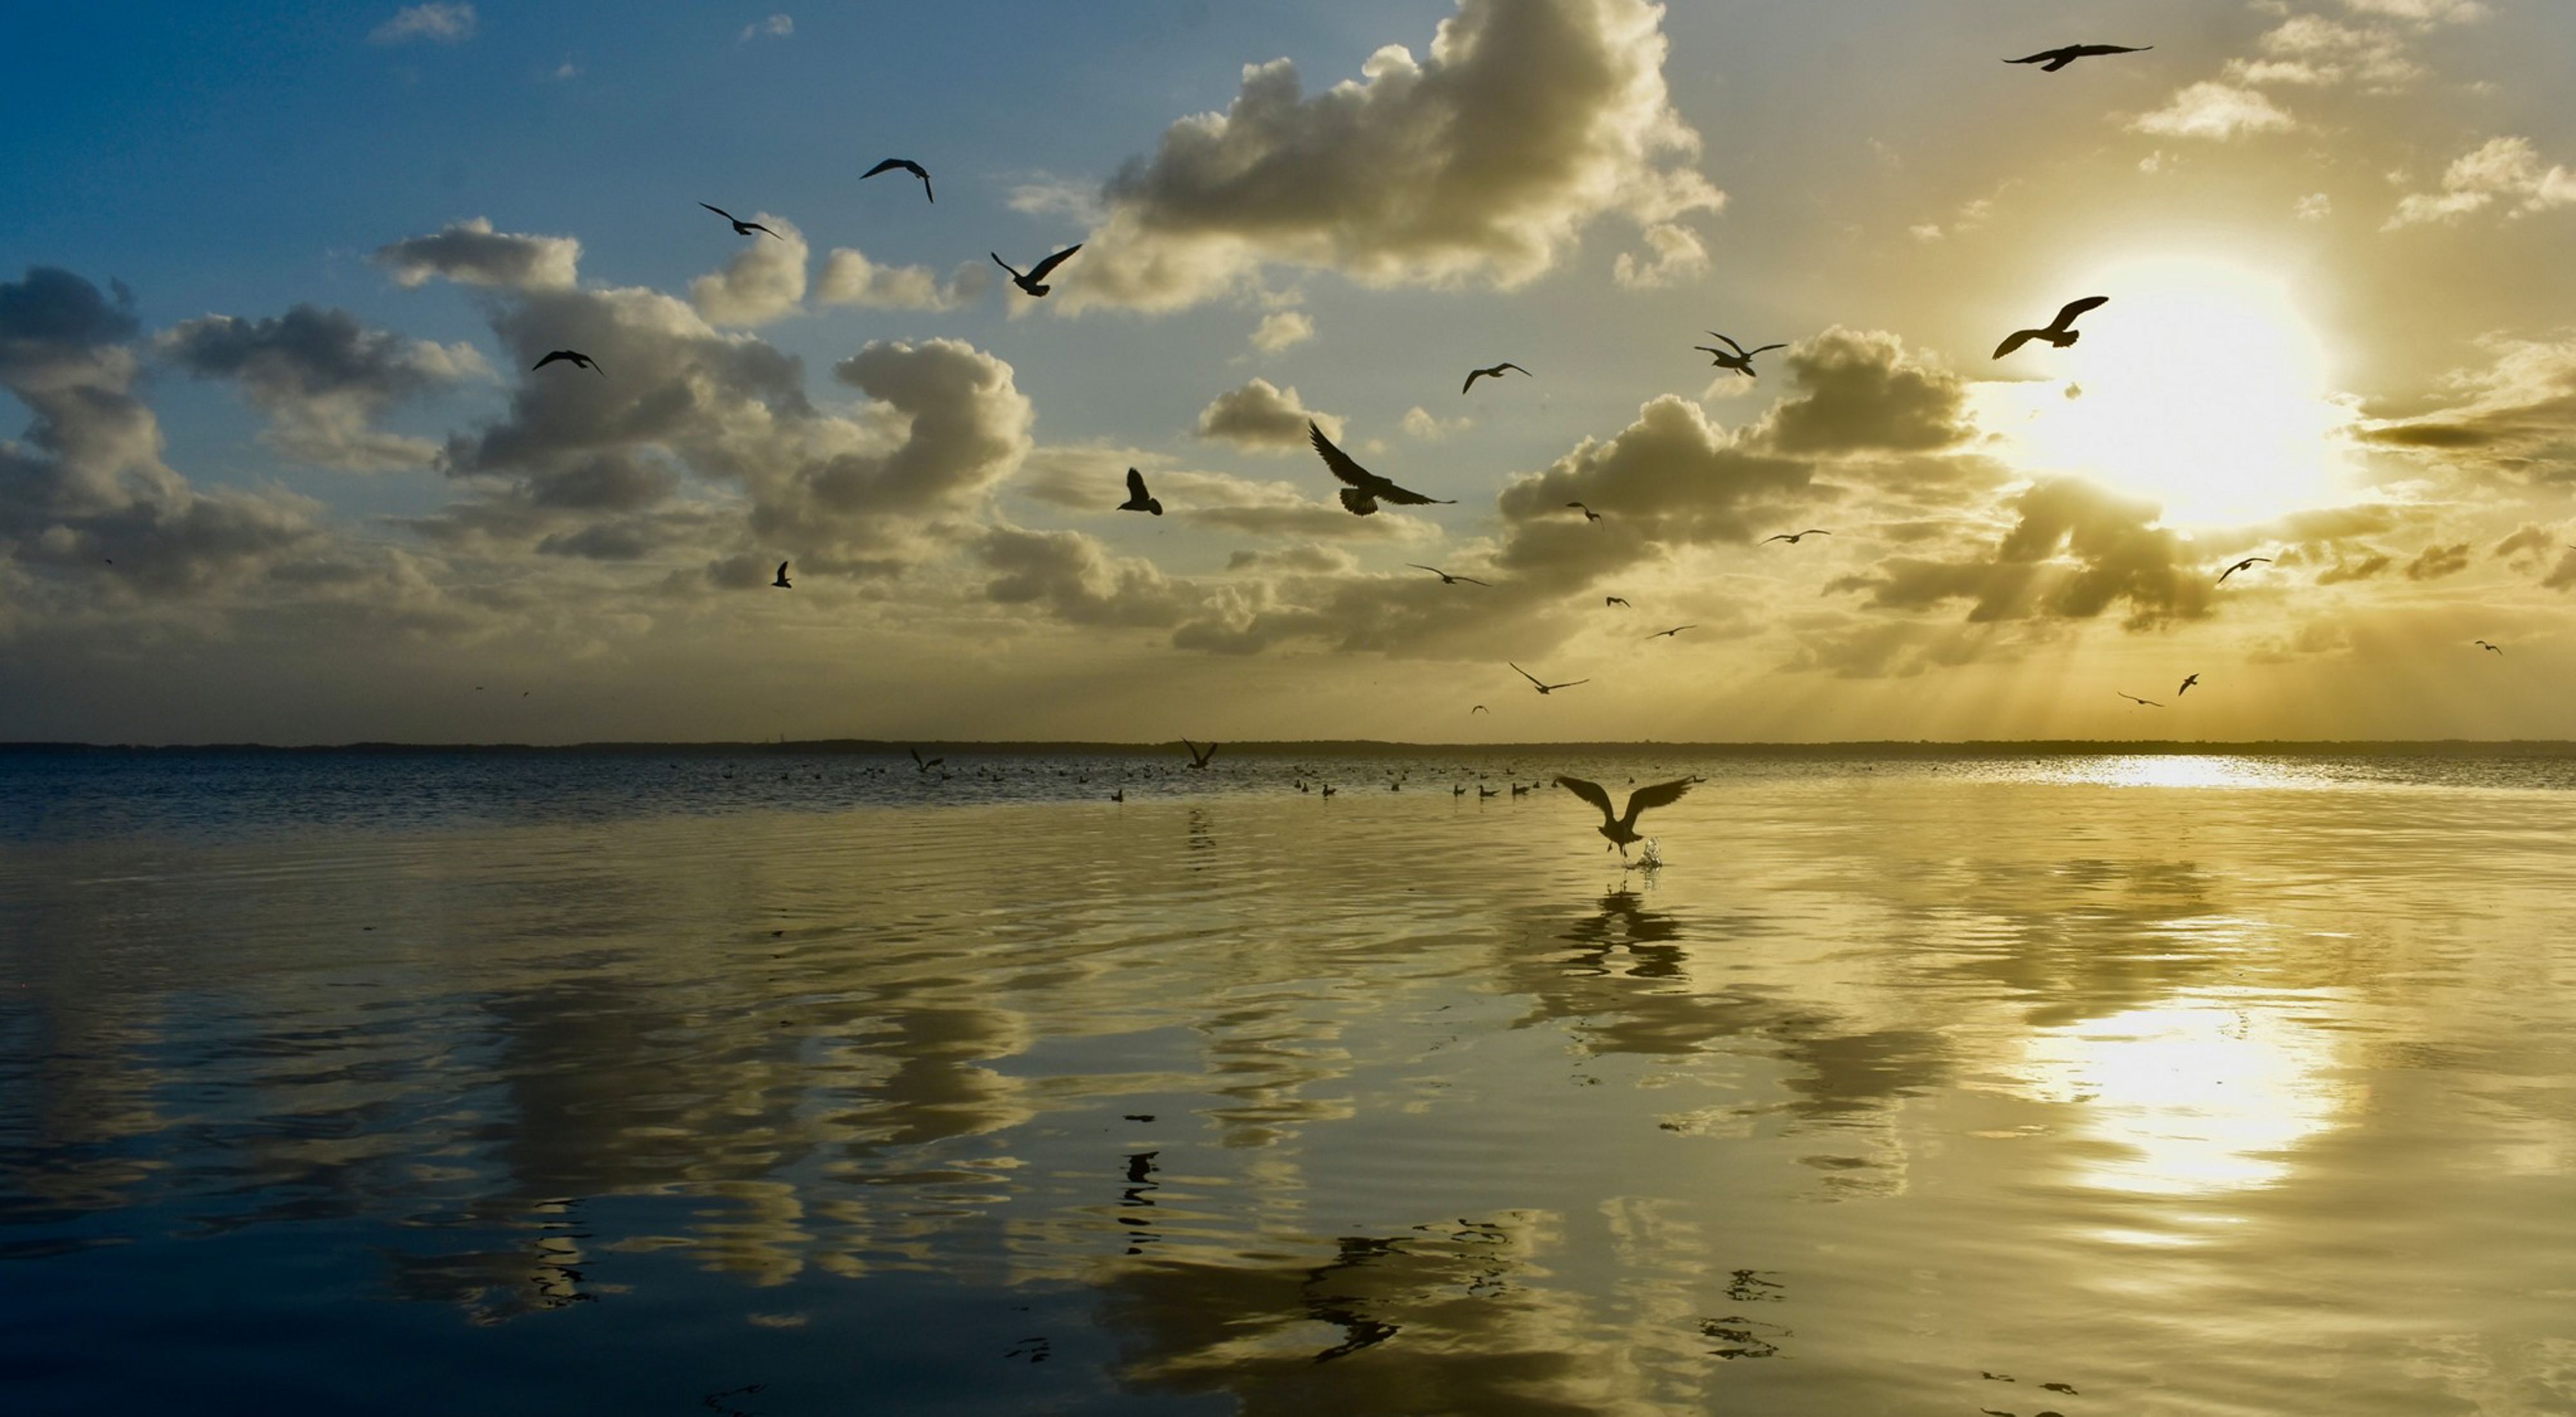 Several birds fly over a body of water as the sun sets, creating a yellow glow.